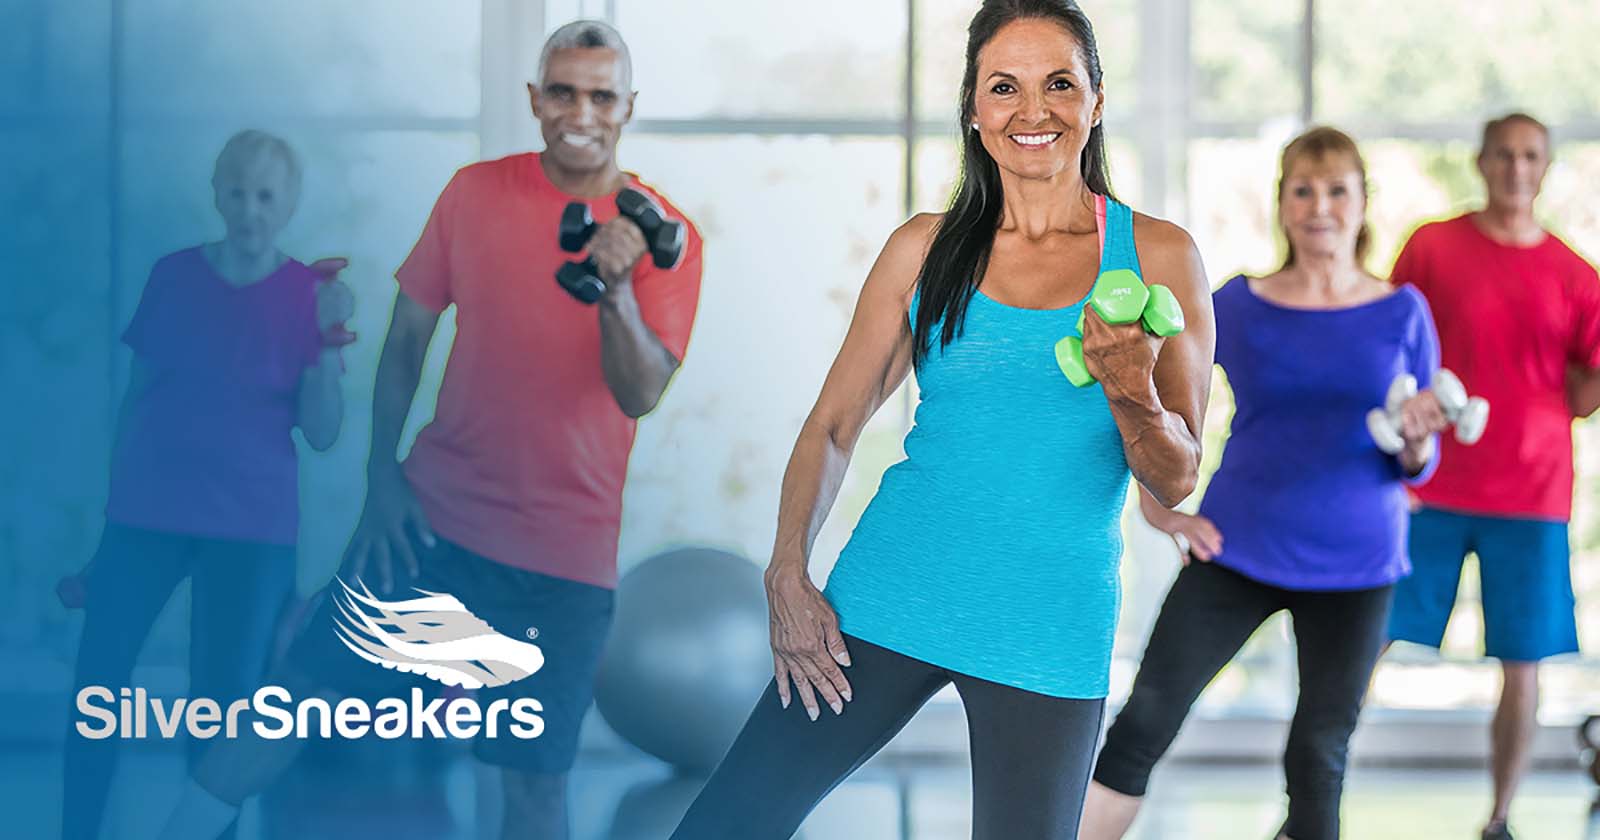 Fitness Locations - SilverSneakers